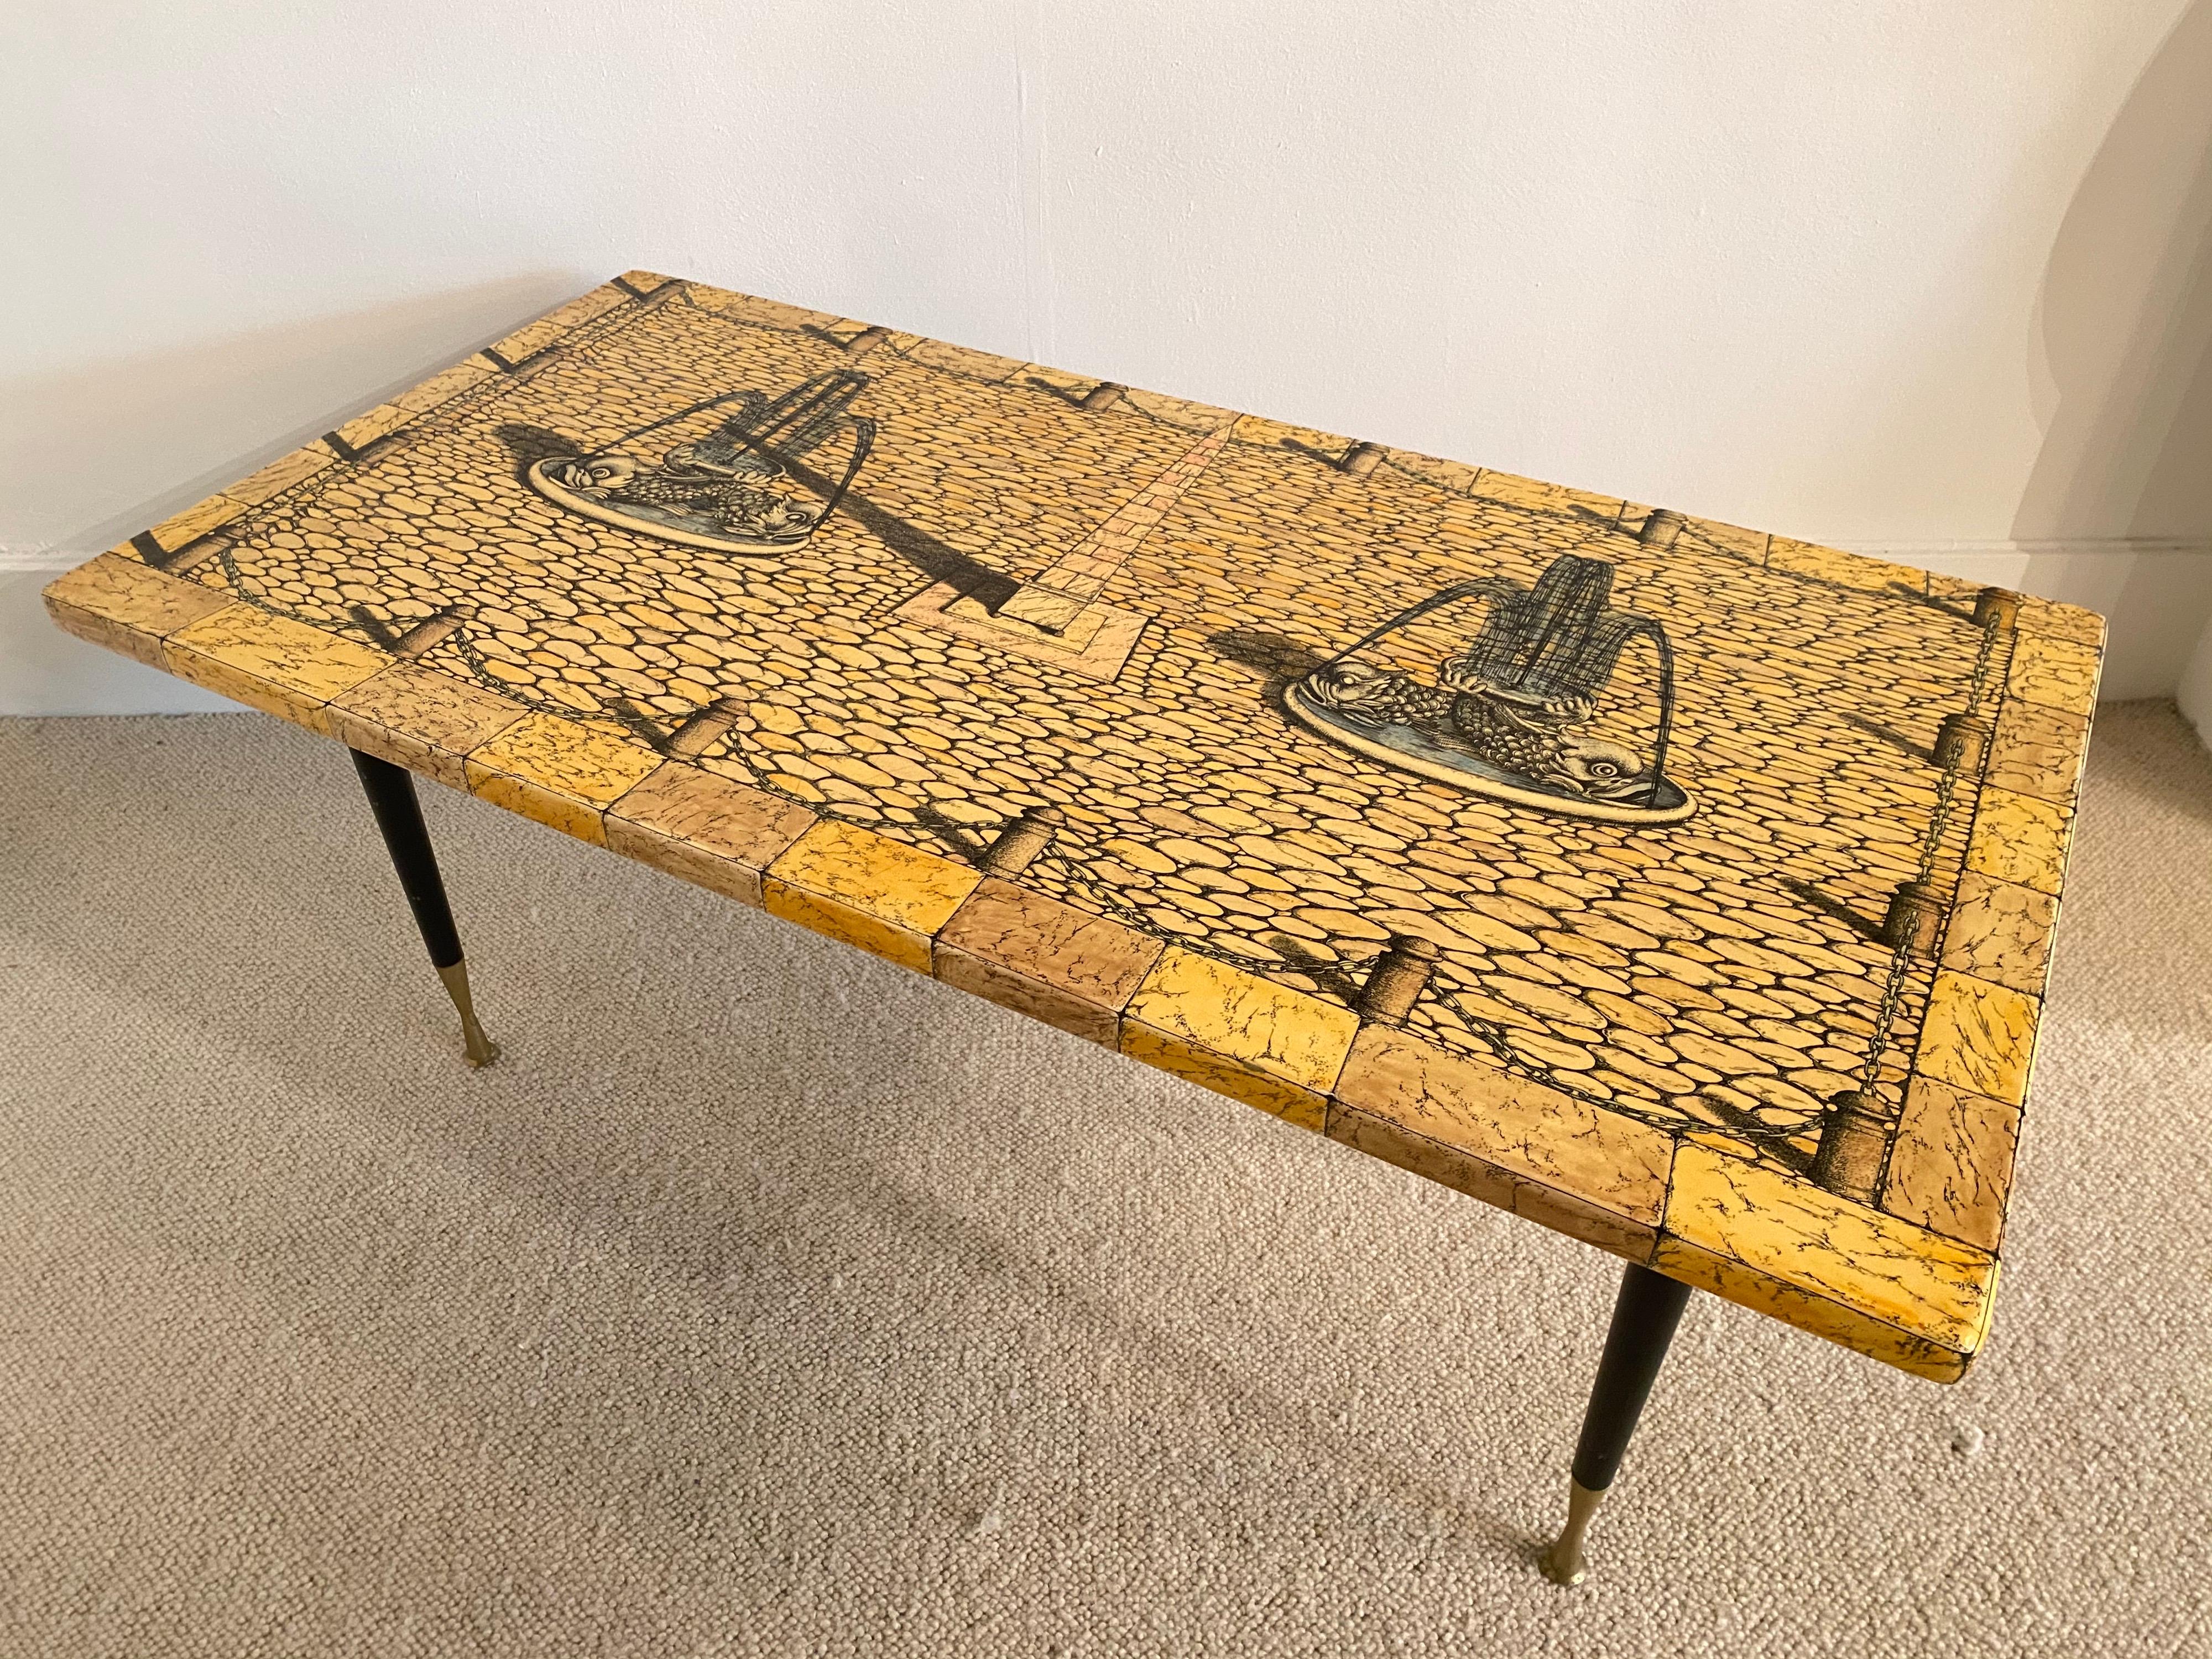 1950s coffee table by Piero Fornasetti
Black lacquered metal and brass feets
Stamped by Fornasetti
Great vintage condition.